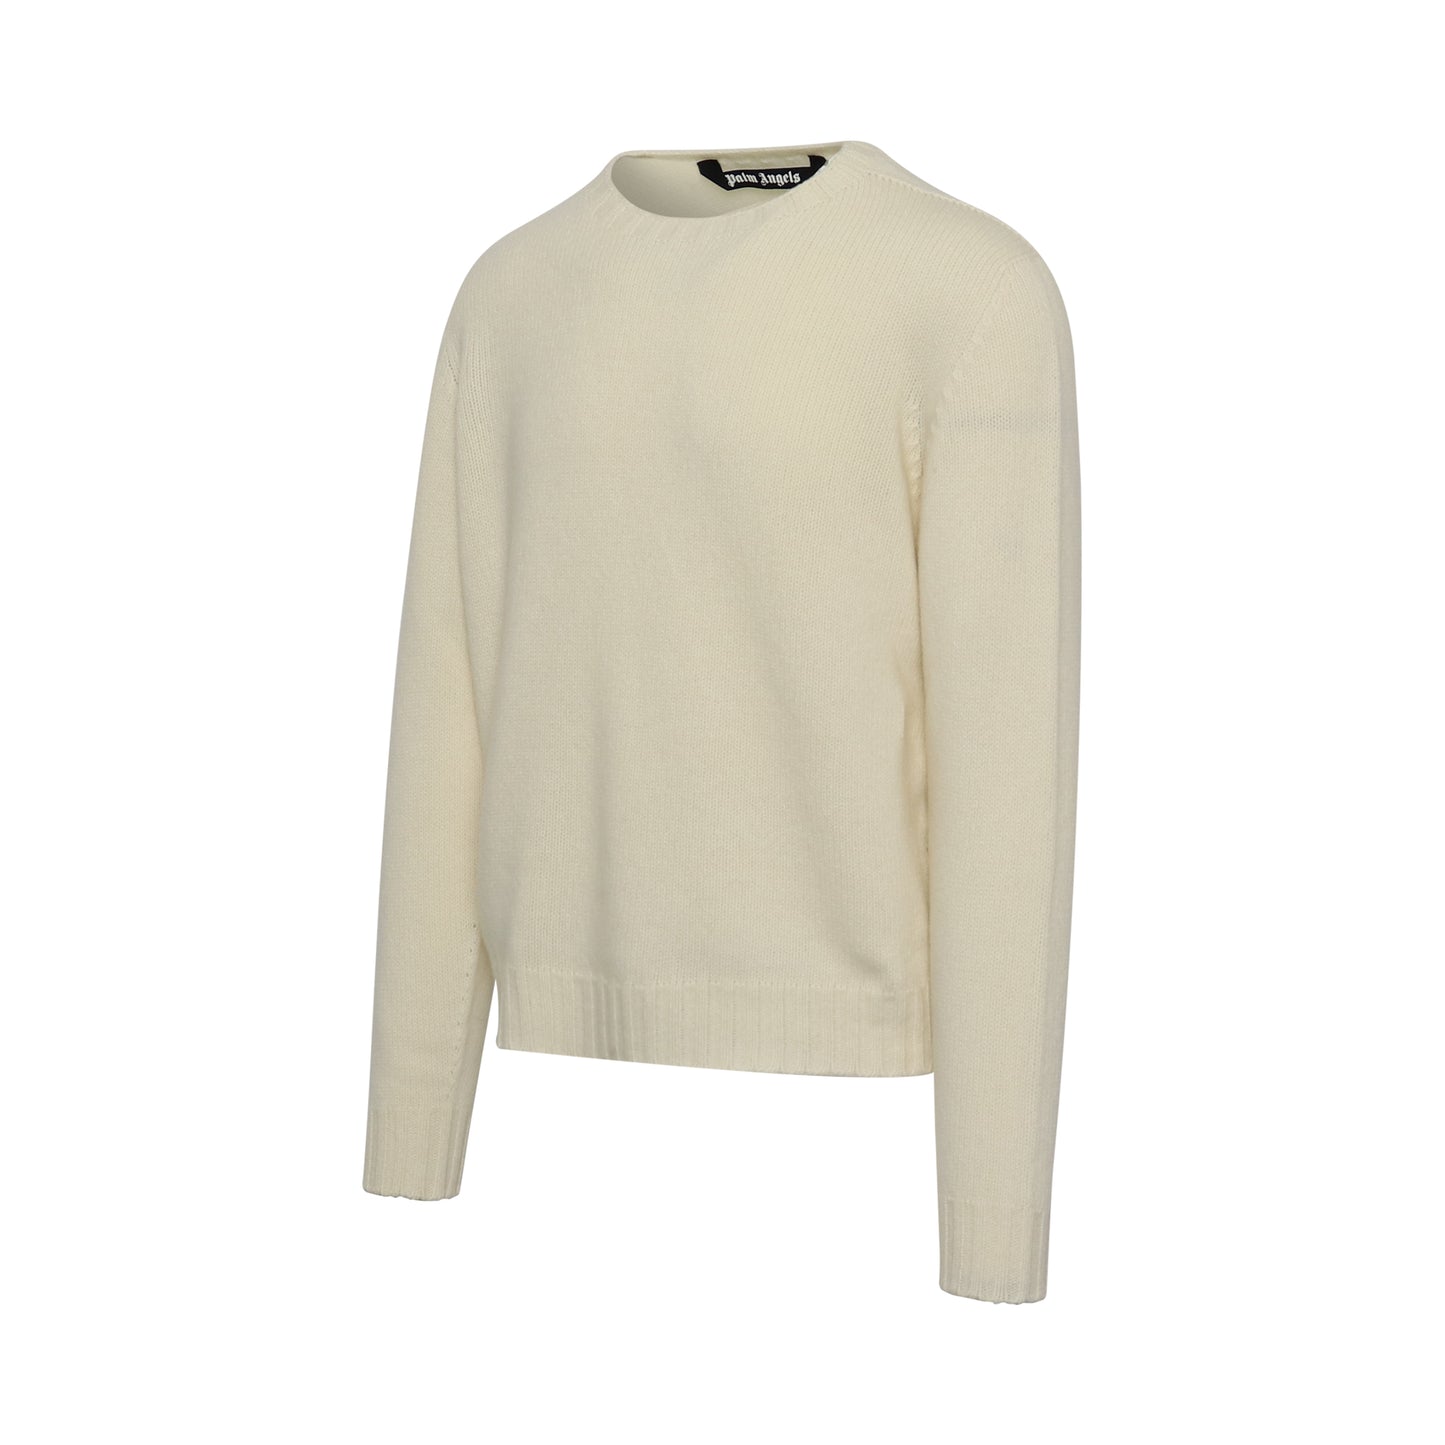 Curved Logo Sweater in Off White